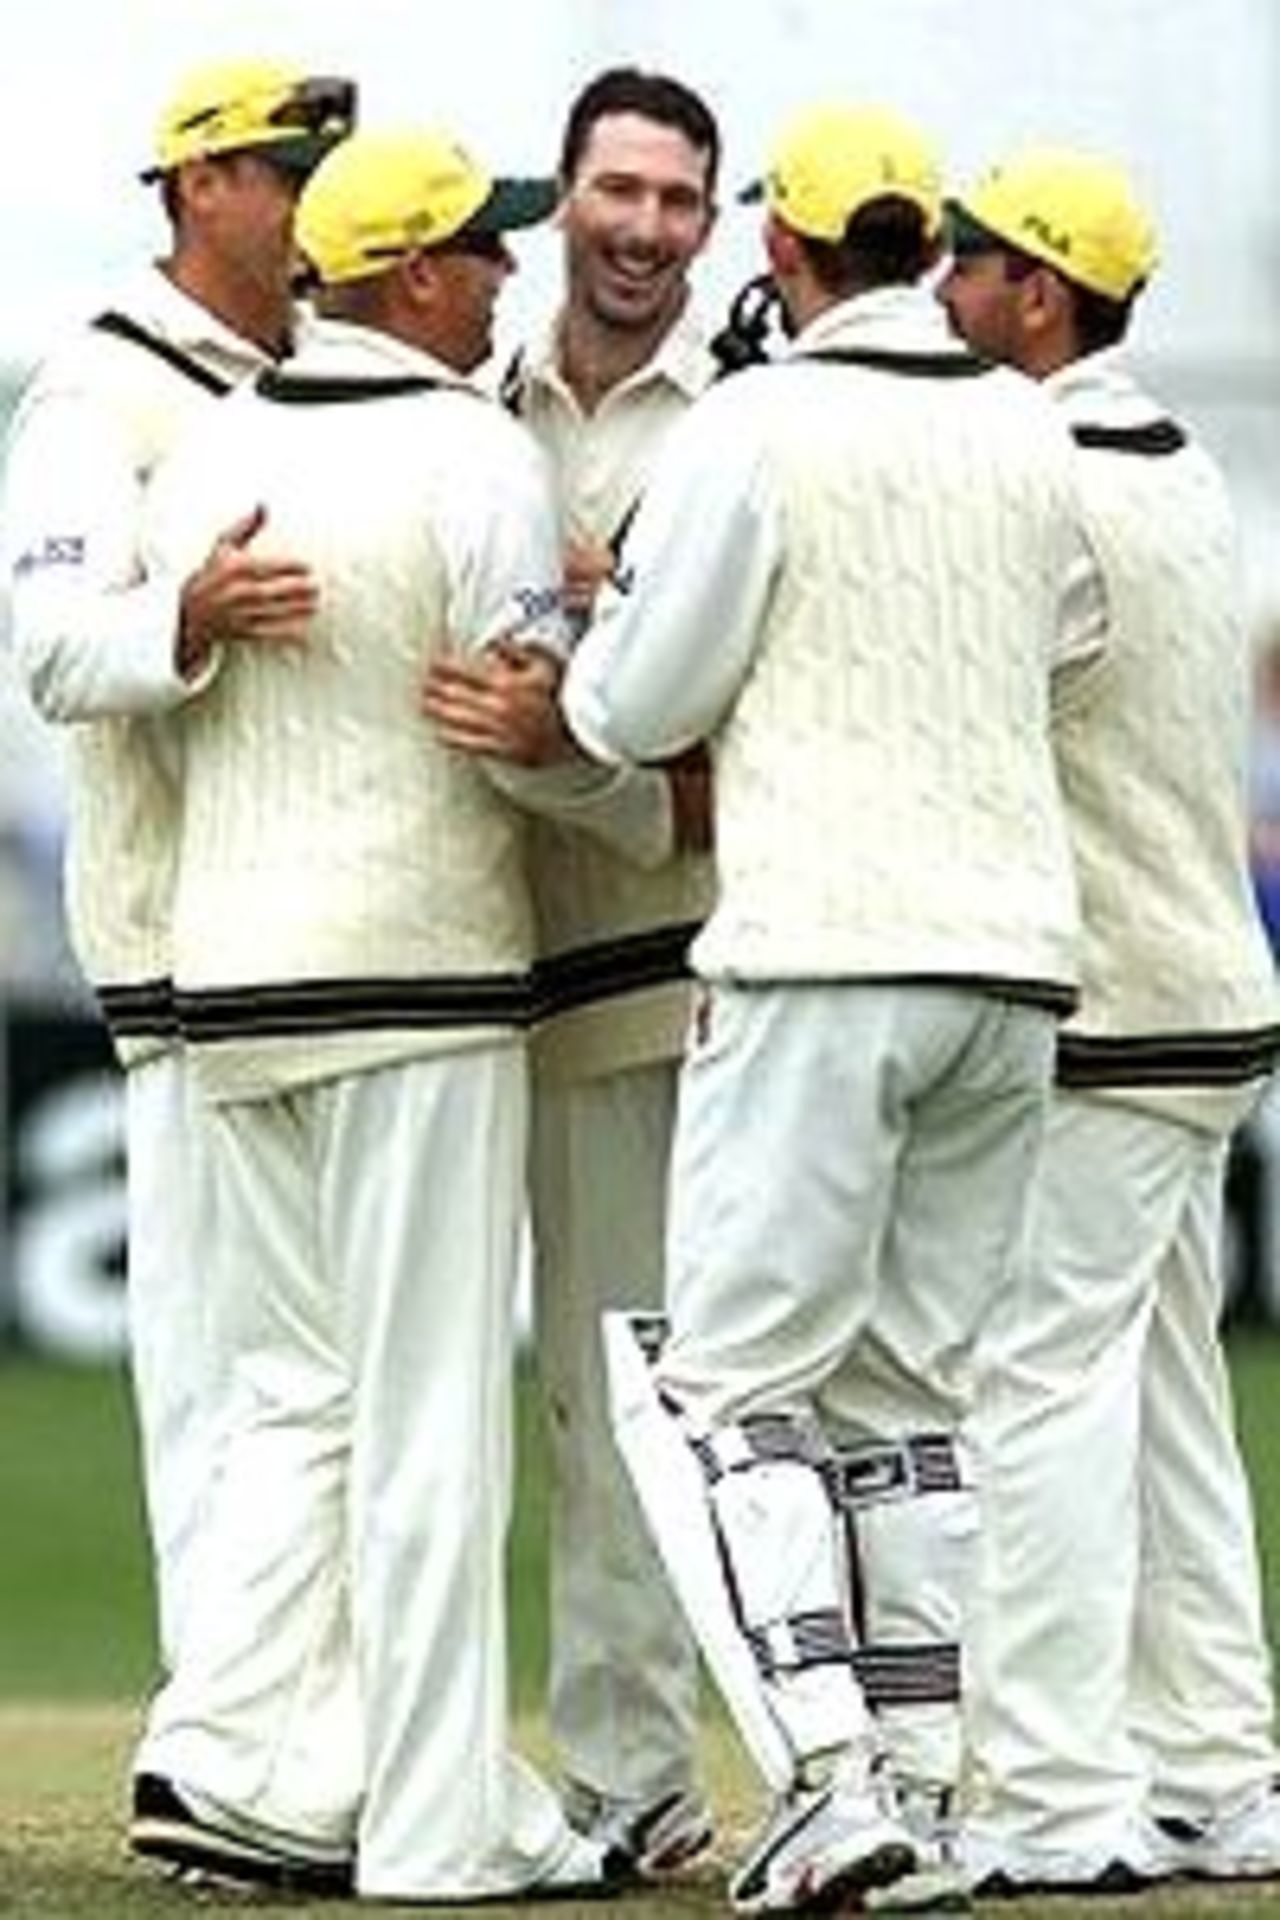 Damien Fleming of Australia is congratulated by team mates after dismissing Graeme Hick of Worcestershire, caught by Shane Warne of Australia for a duck, during day three of the tour match between Worcestershire and Australia played at New Road, Worcester, England.